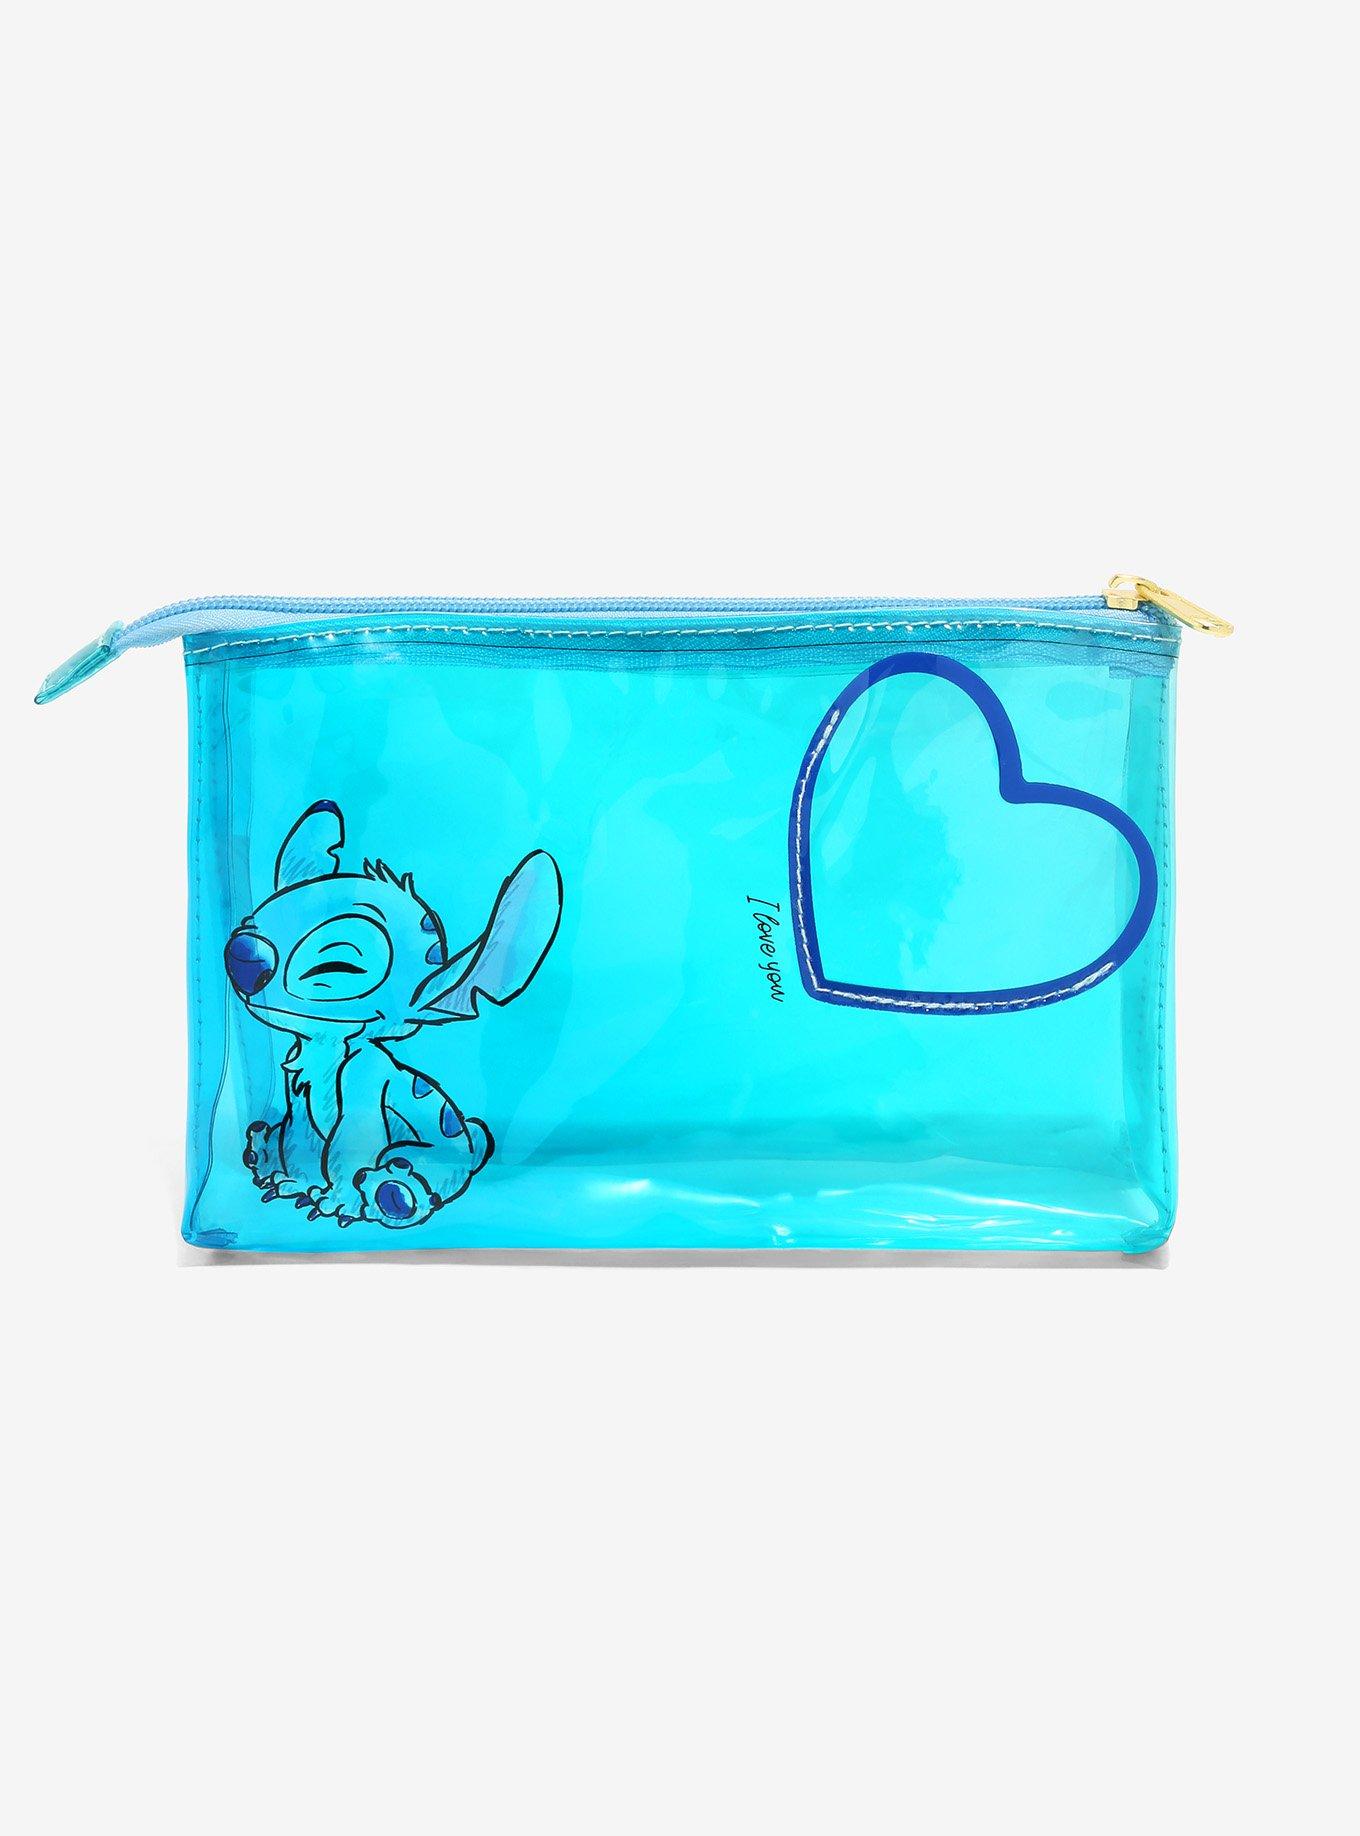 Official Lilo & Stitch Pencil case 484309: Buy Online on Offer